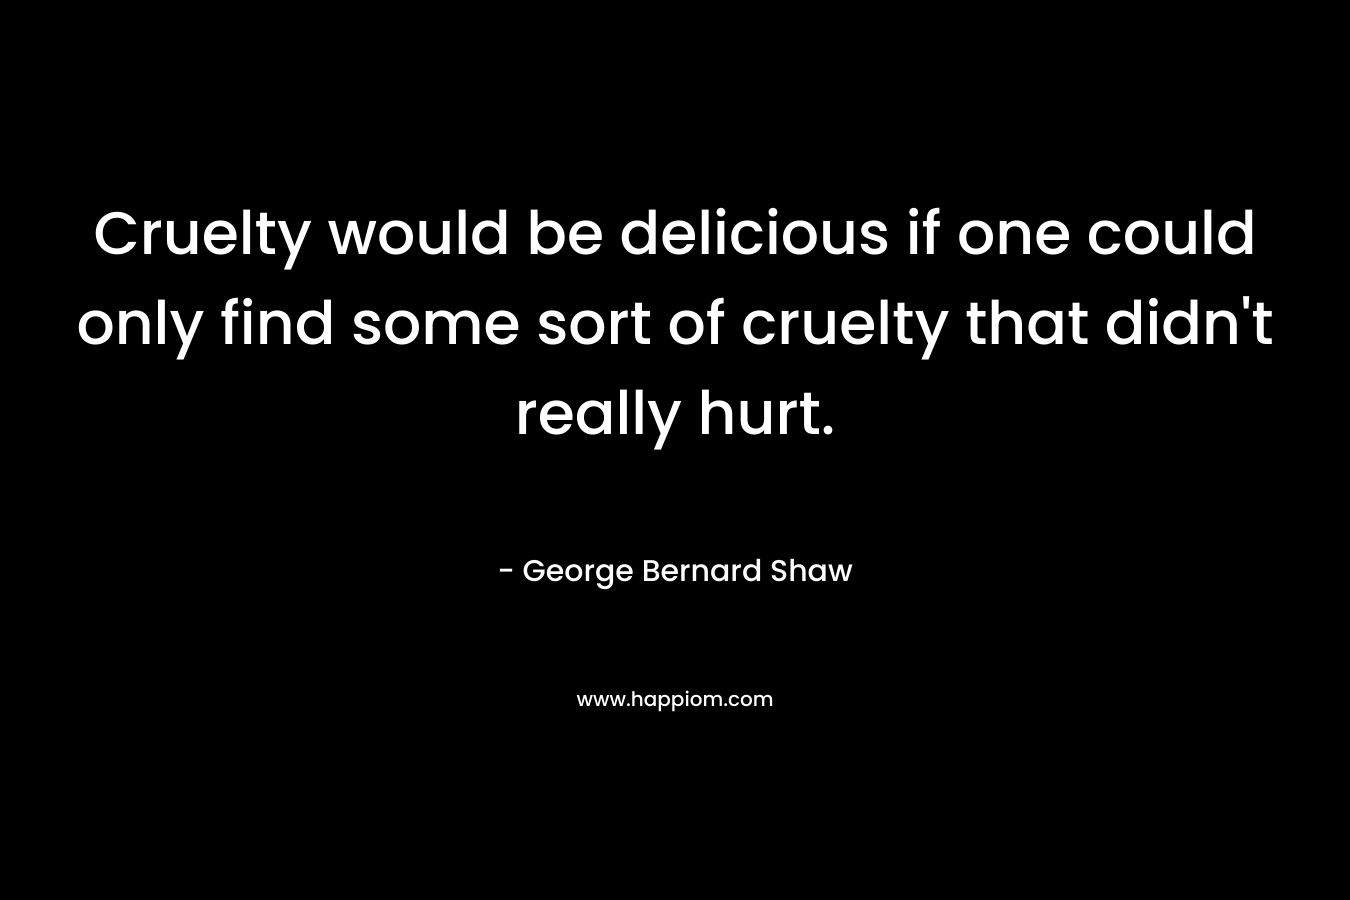 Cruelty would be delicious if one could only find some sort of cruelty that didn't really hurt.